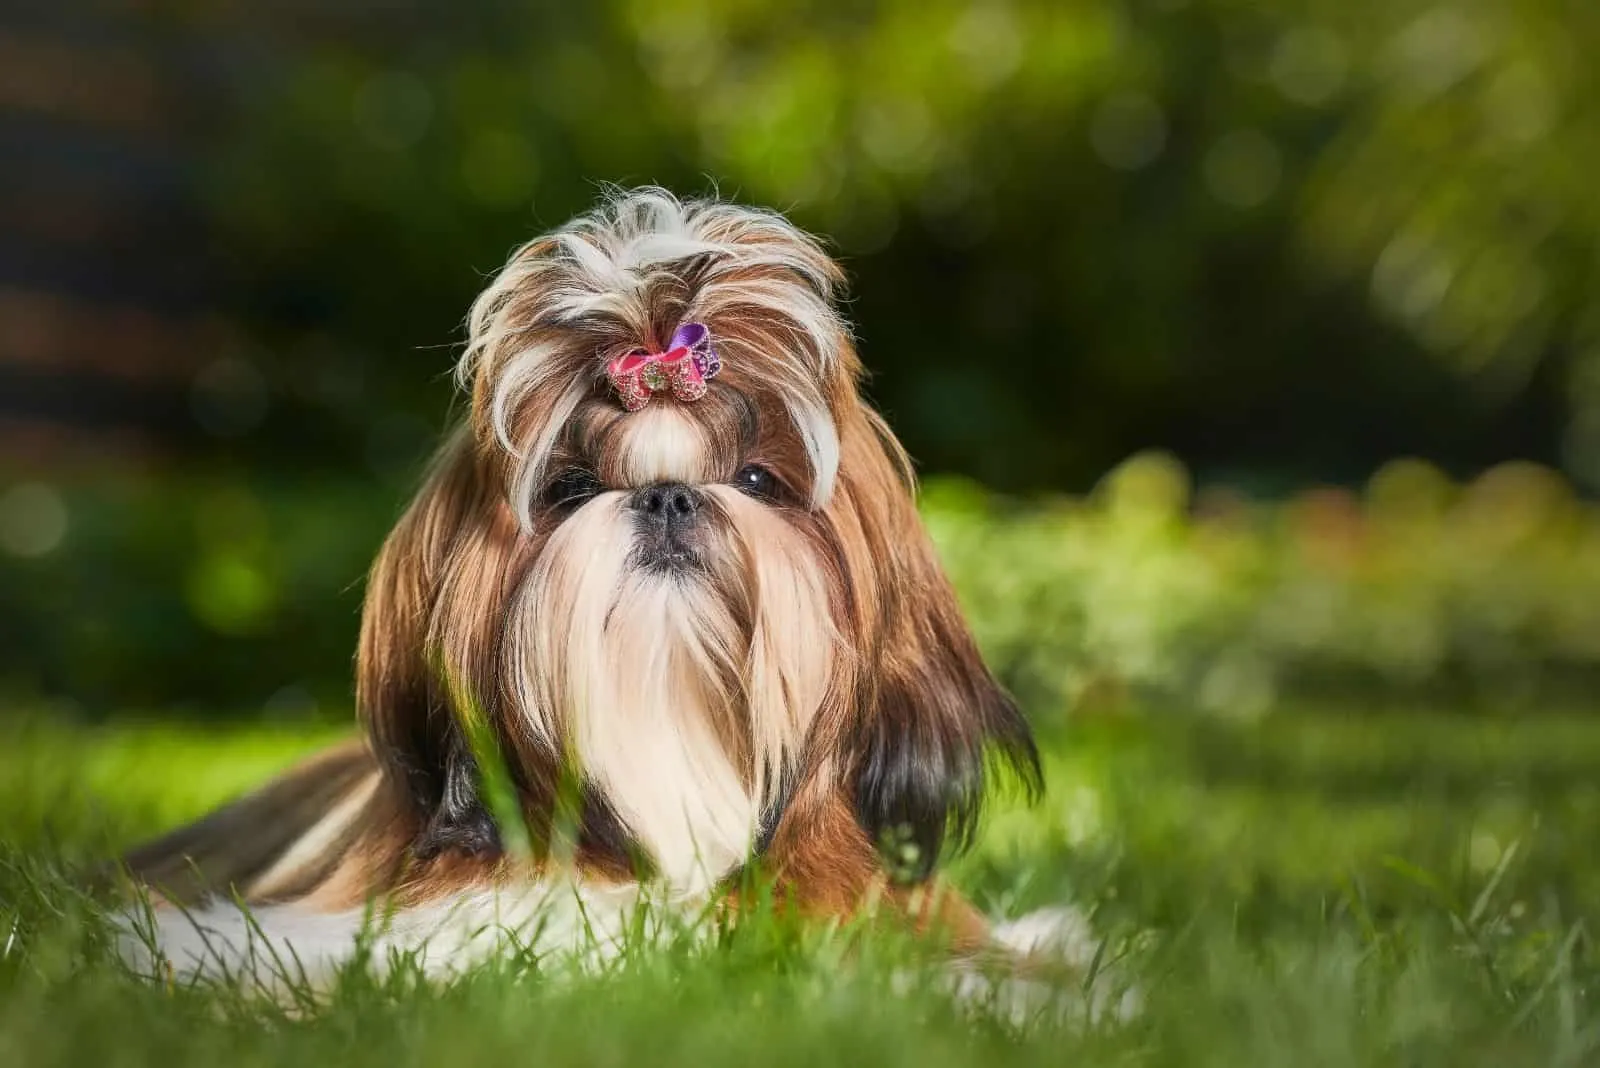 brindle white shih tzu with clip on hair sitting outdoors